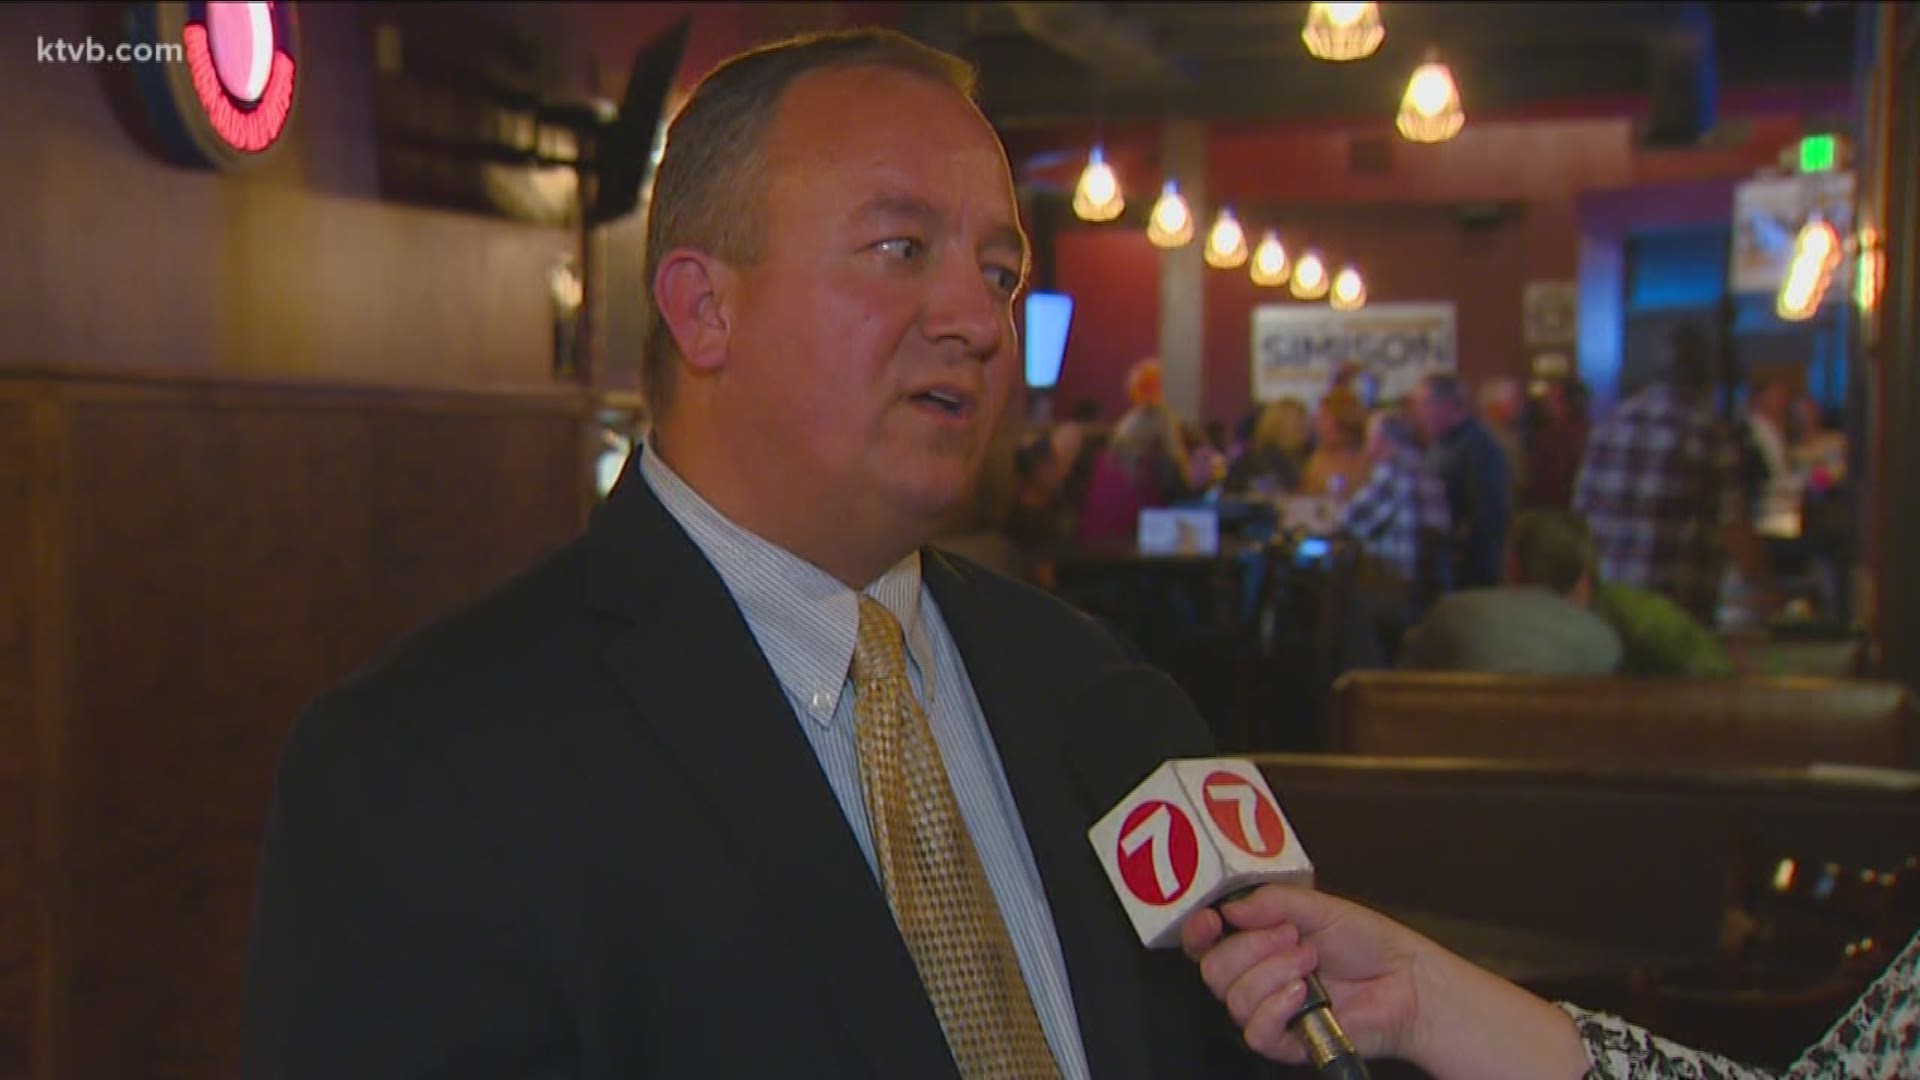 Simison talked with KTVB about his vision for the city which includes how best to manage growth.